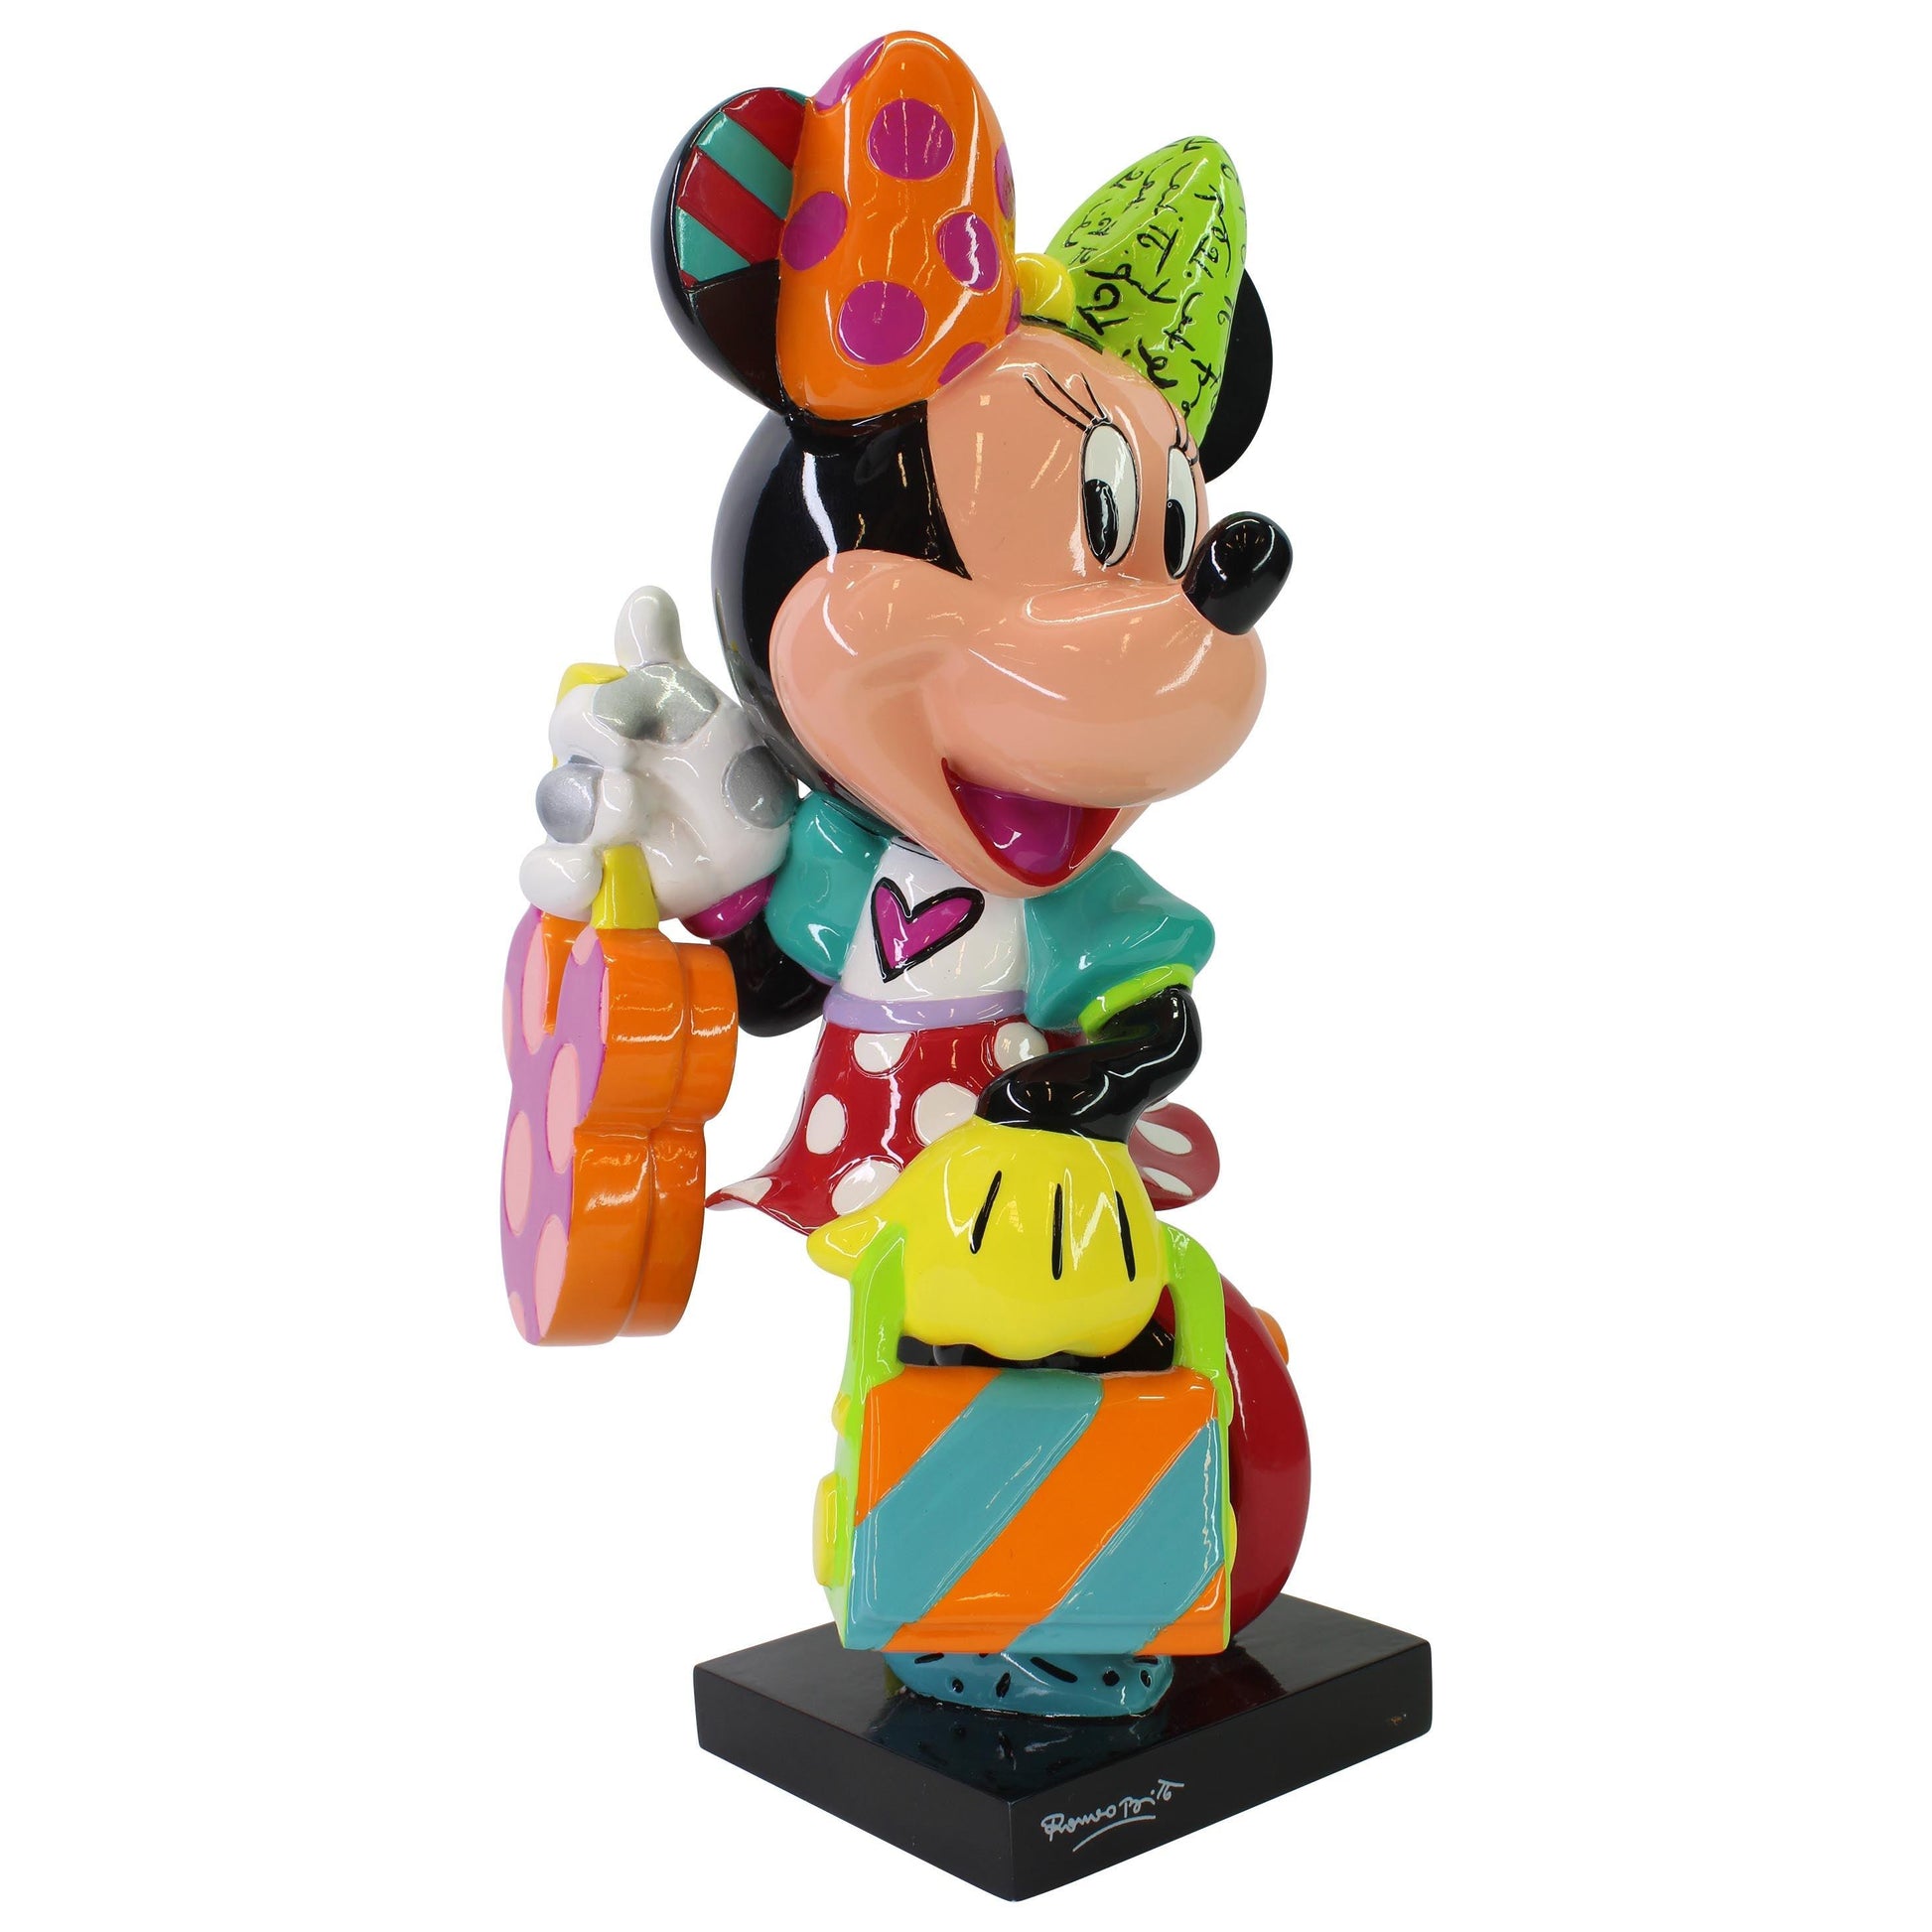 Minnie Mouse Fashionista Figurine (Disney Britto Collection) - Gallery Gifts Online 